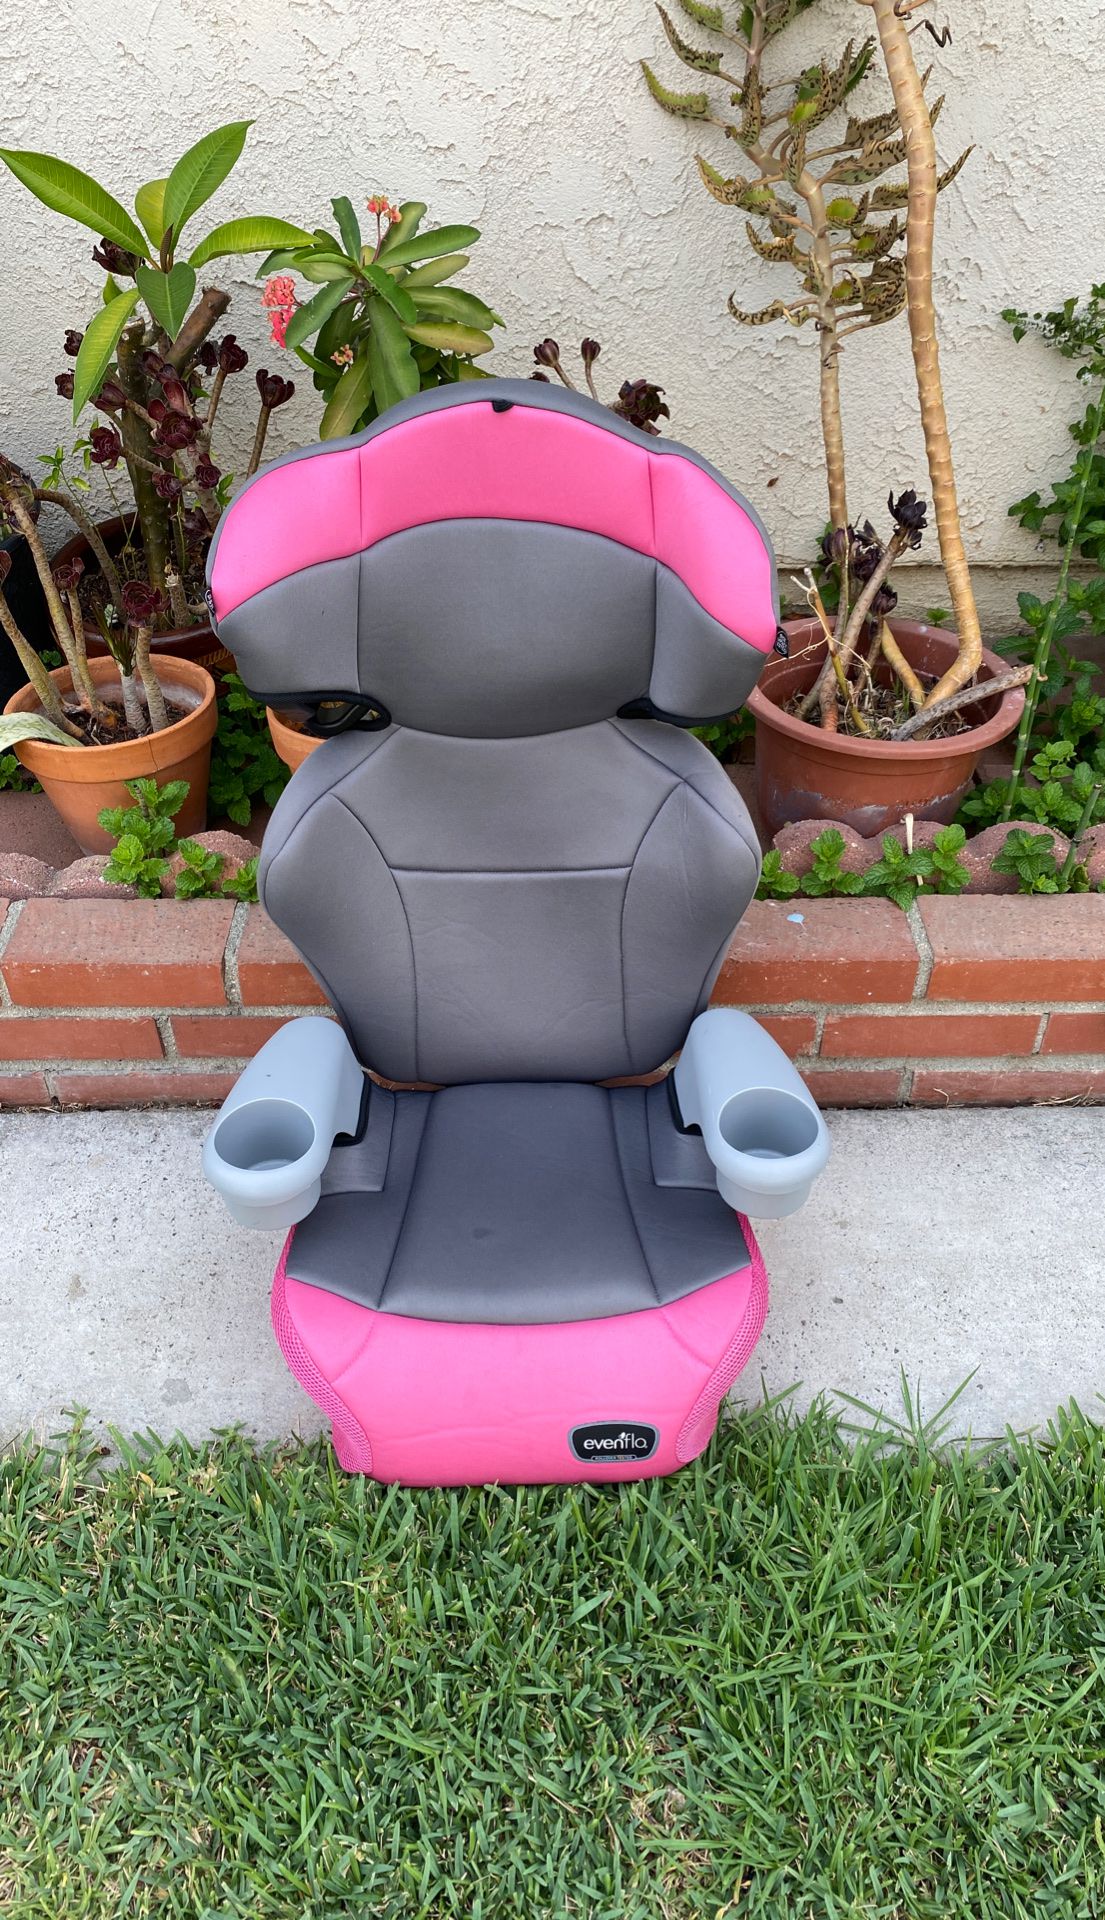 Car seat for sale brand even close